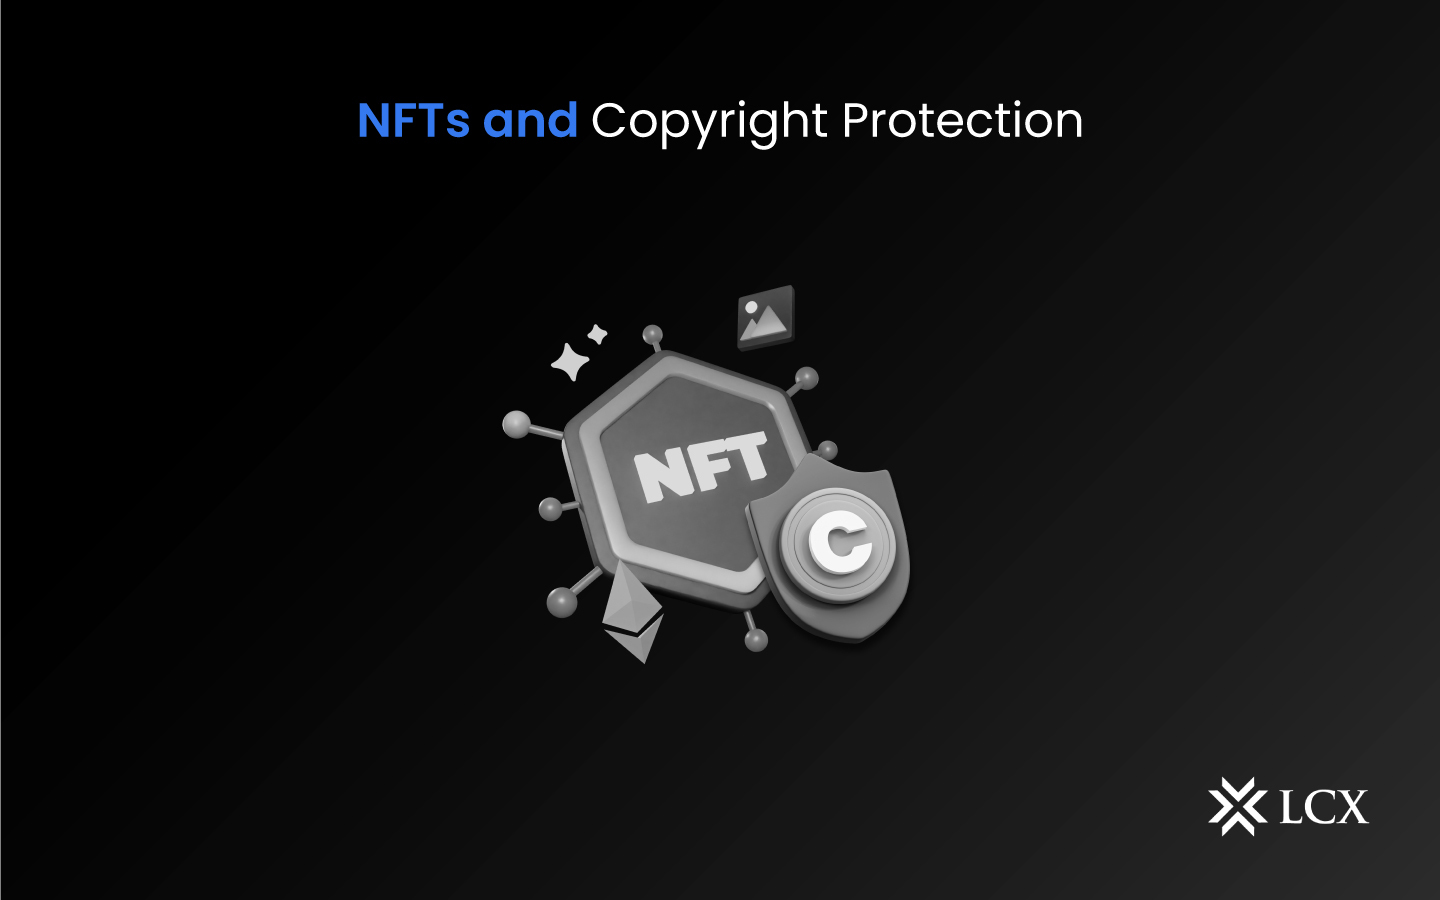 NFTs: Digital Assets and Their Copyright Protection